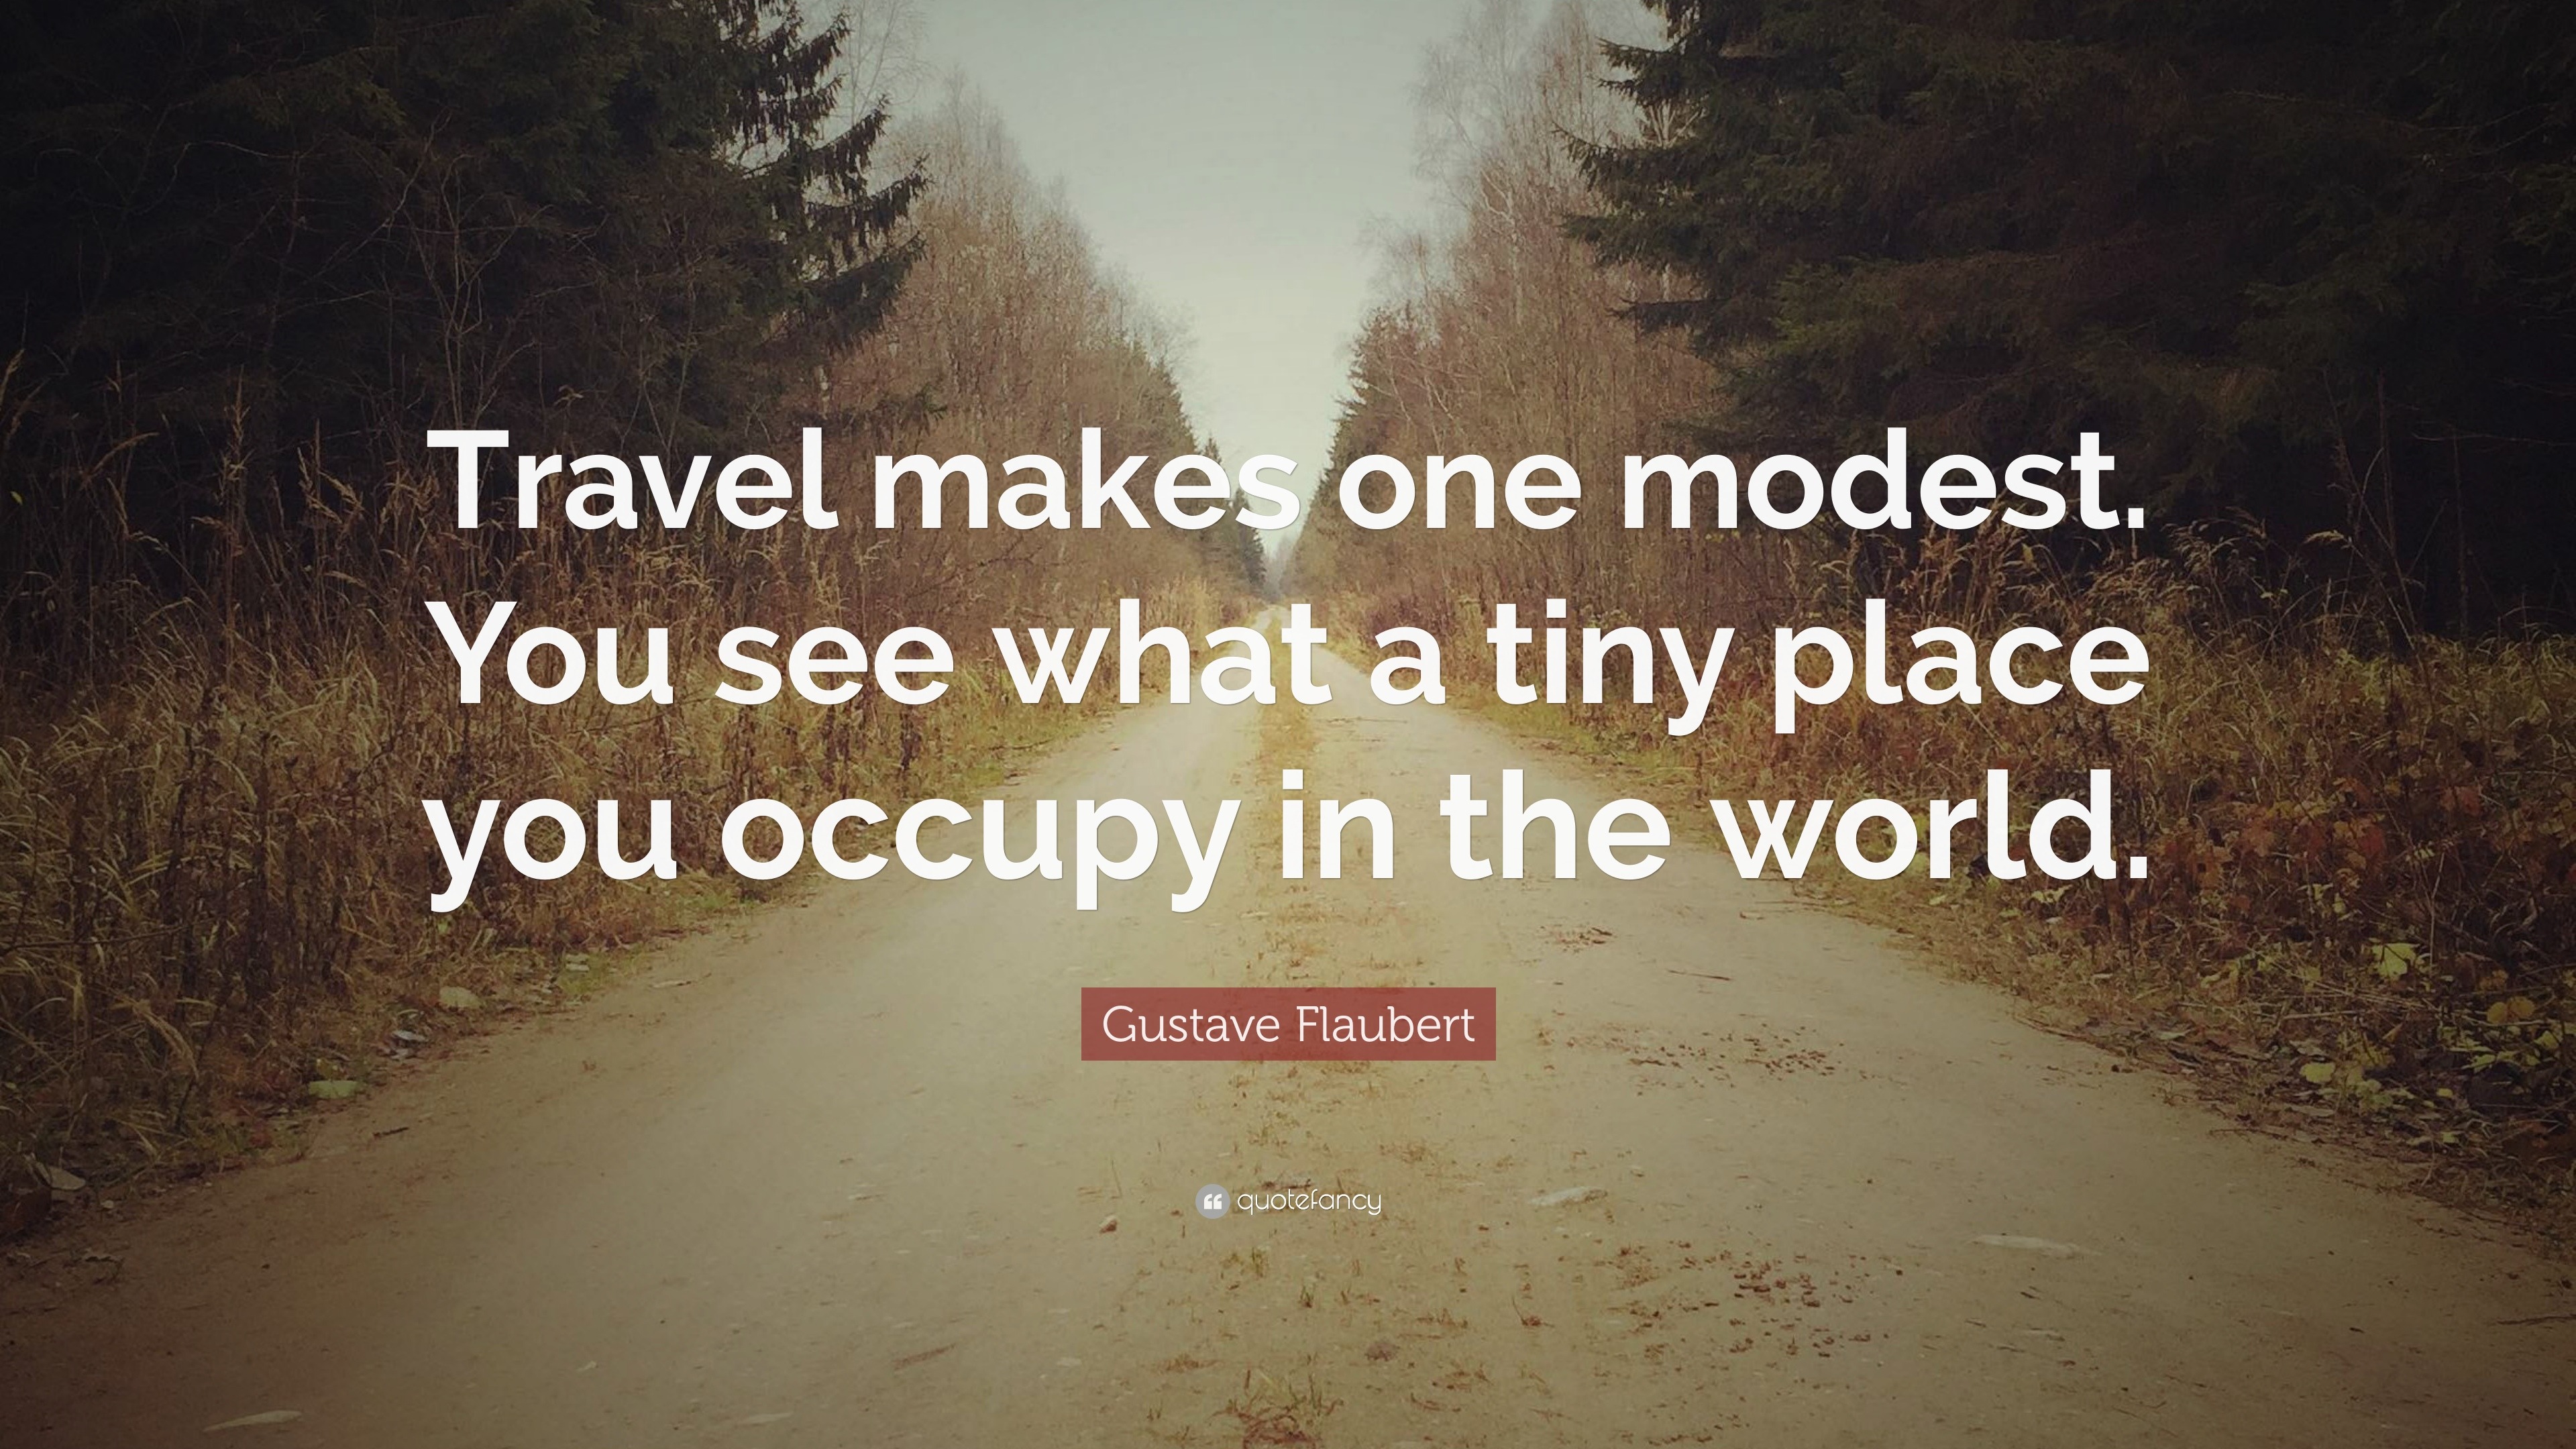 Gustave Flaubert Quote: “Travel makes one modest. You see what a tiny